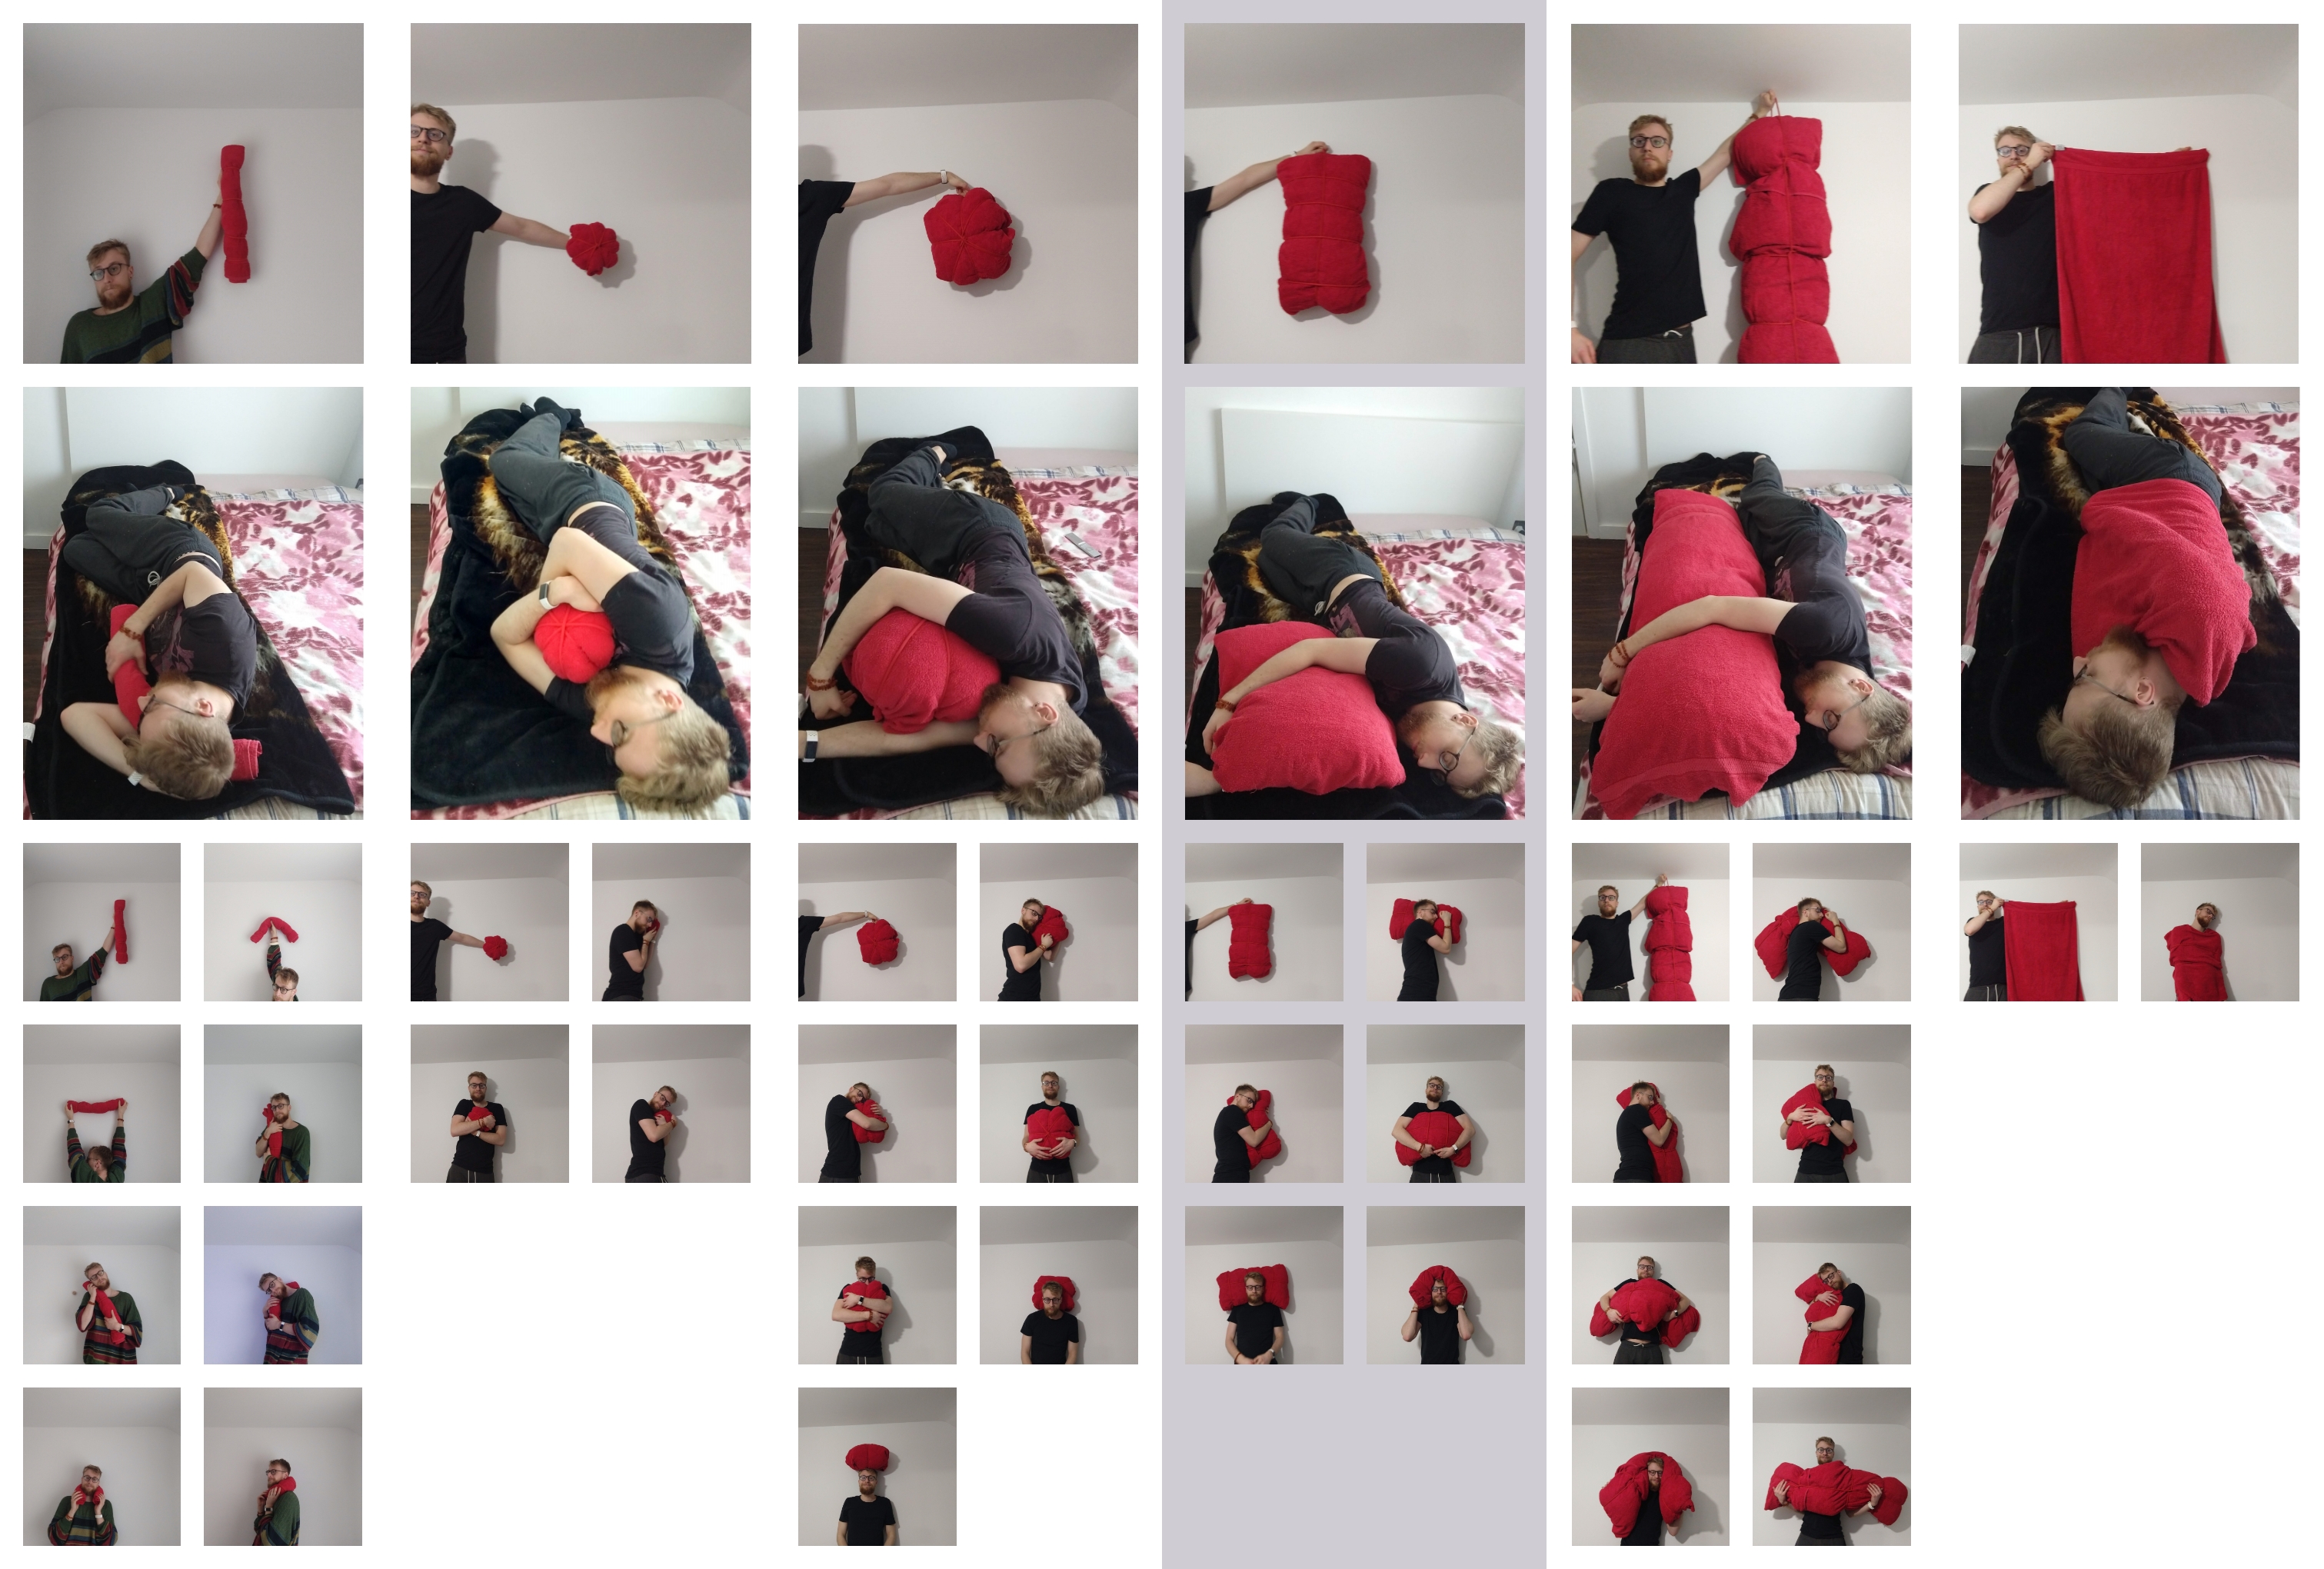 Collection of thumbnails with different shaped pillows and poses